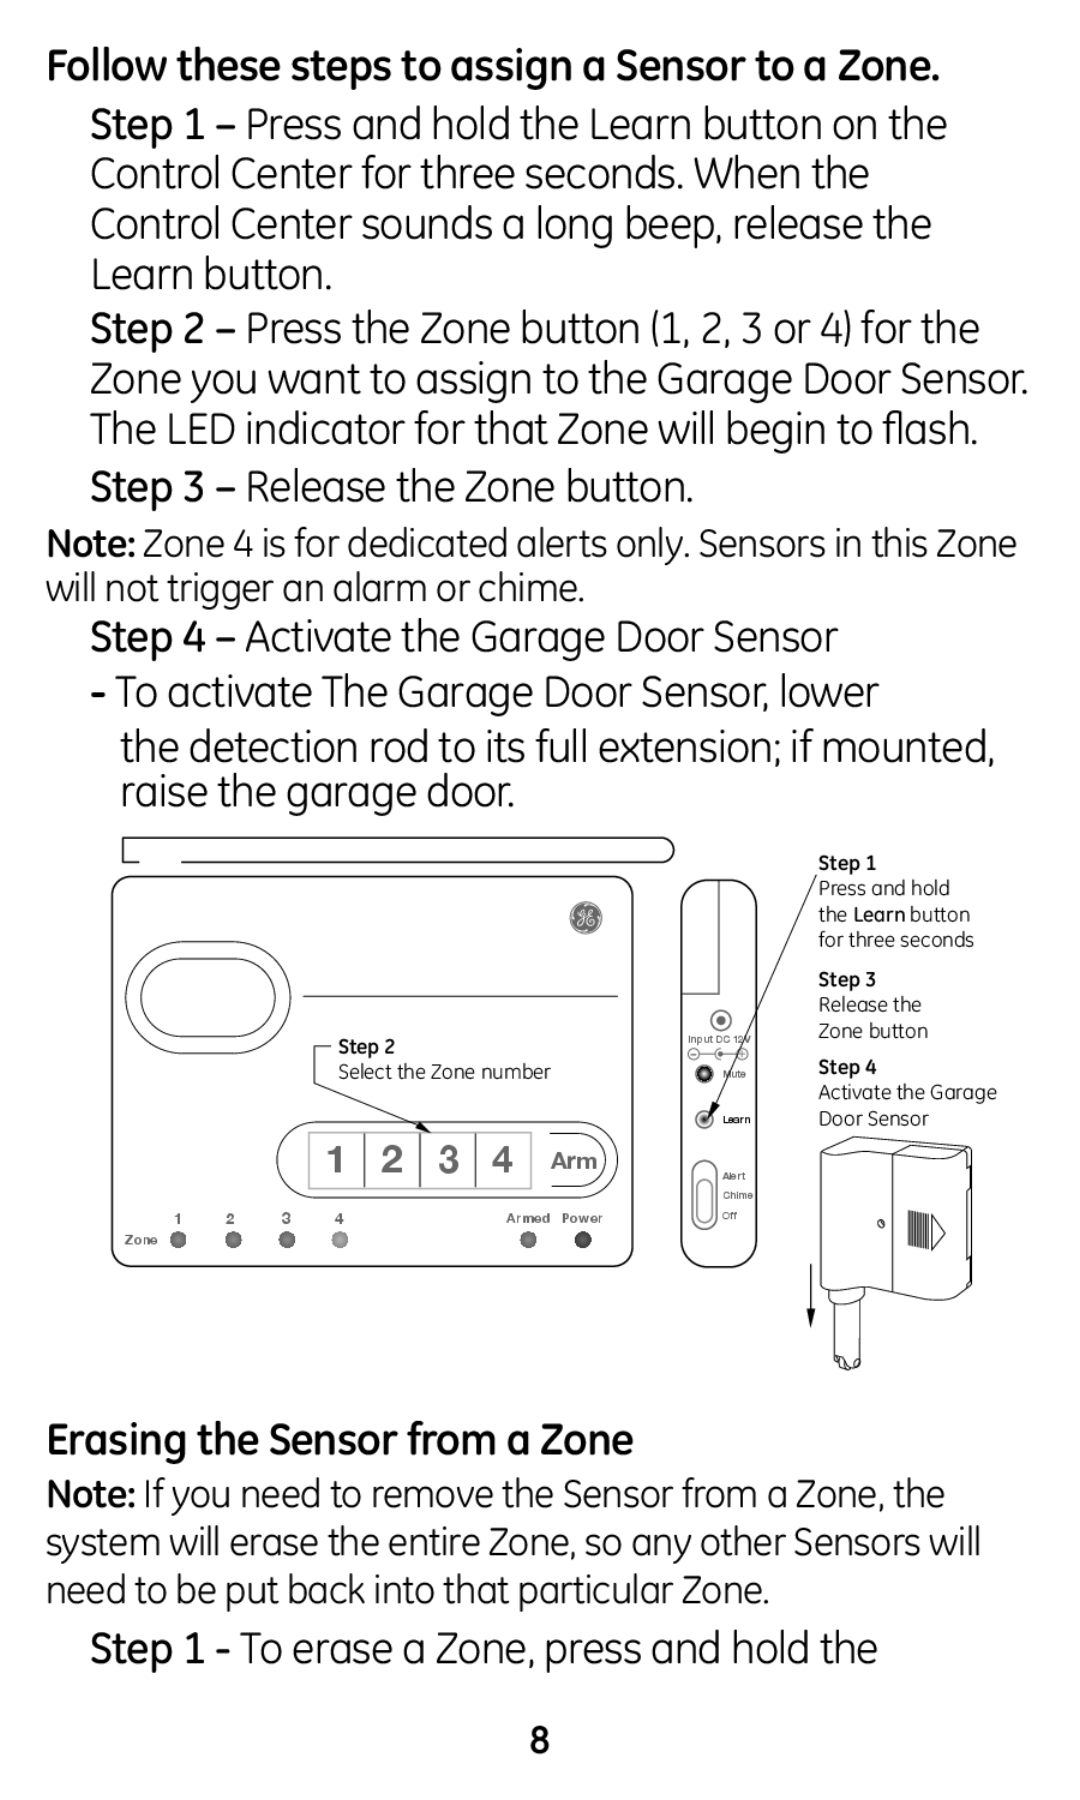 GE 45130 user manual Follow these steps to assign a Sensor to a Zone, Erasing the Sensor from a Zone 